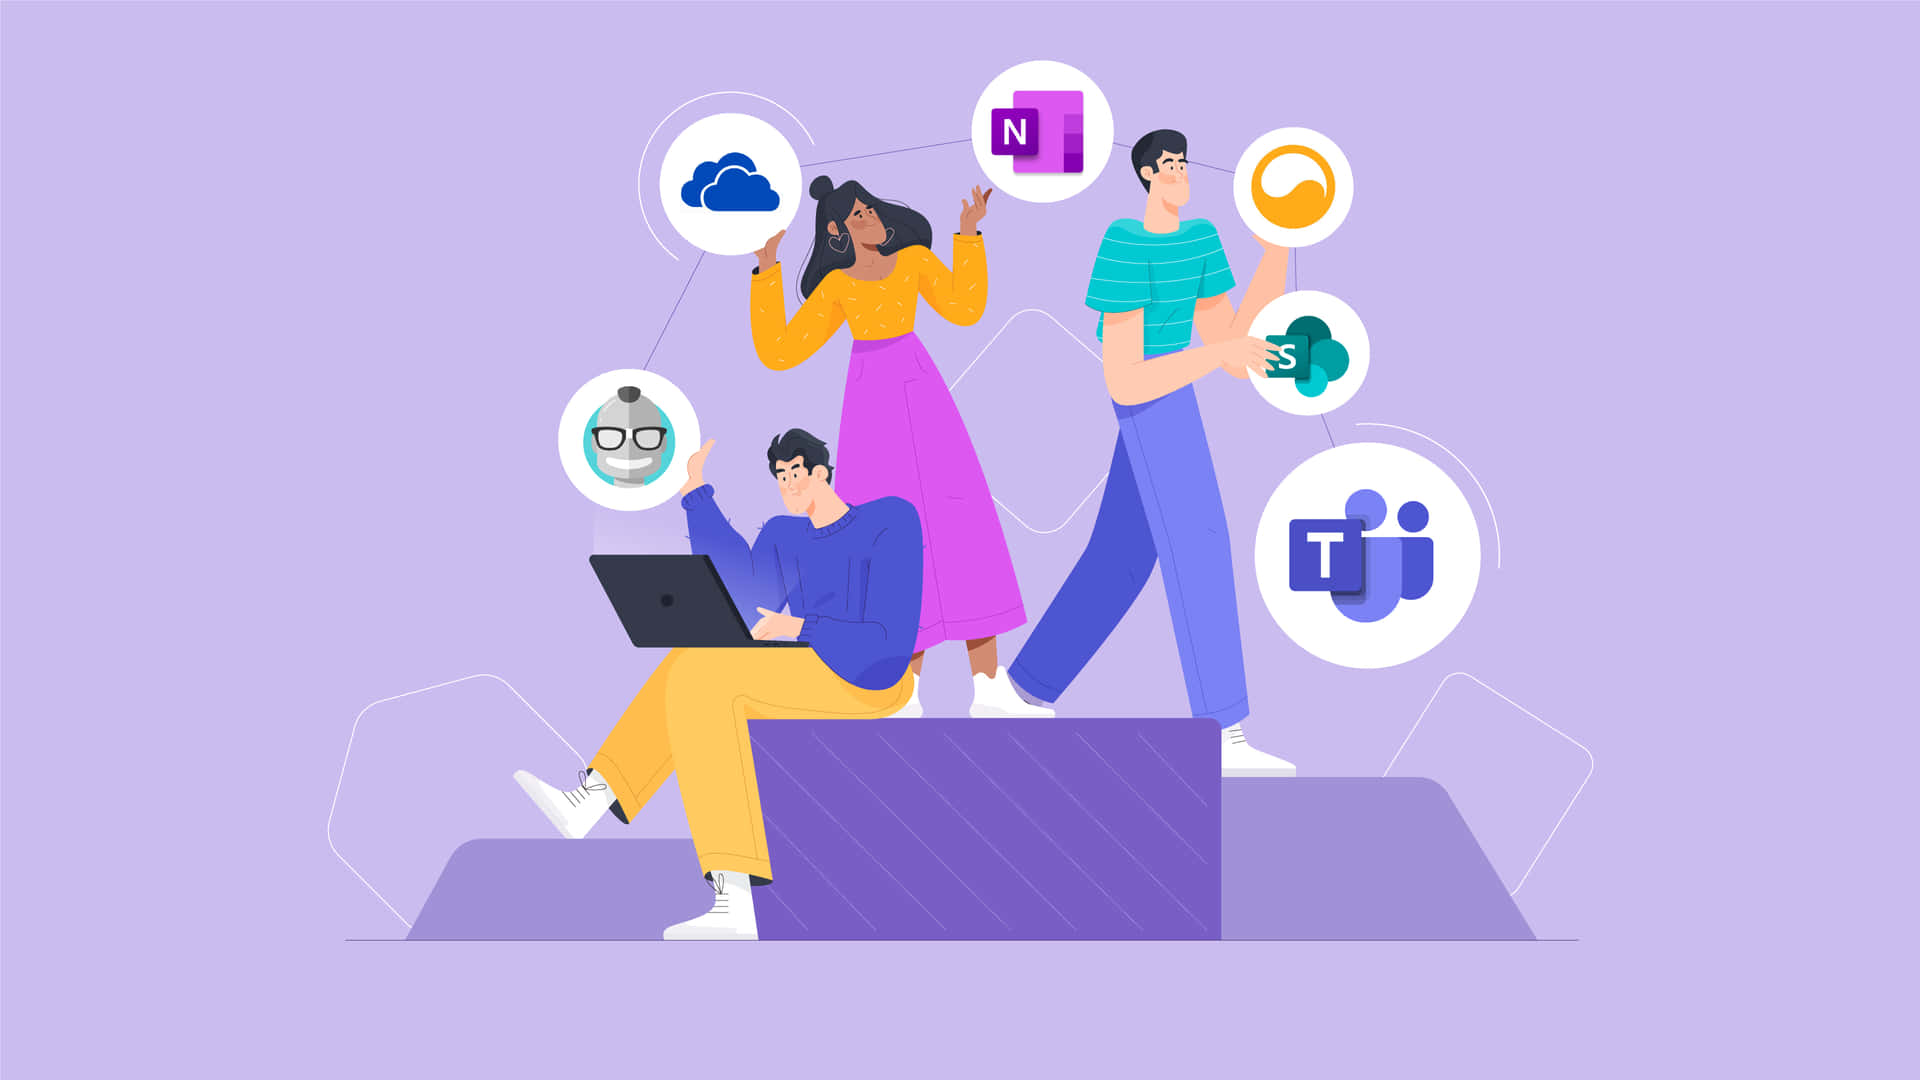 Transitioning to remote work is easier with Microsoft Teams